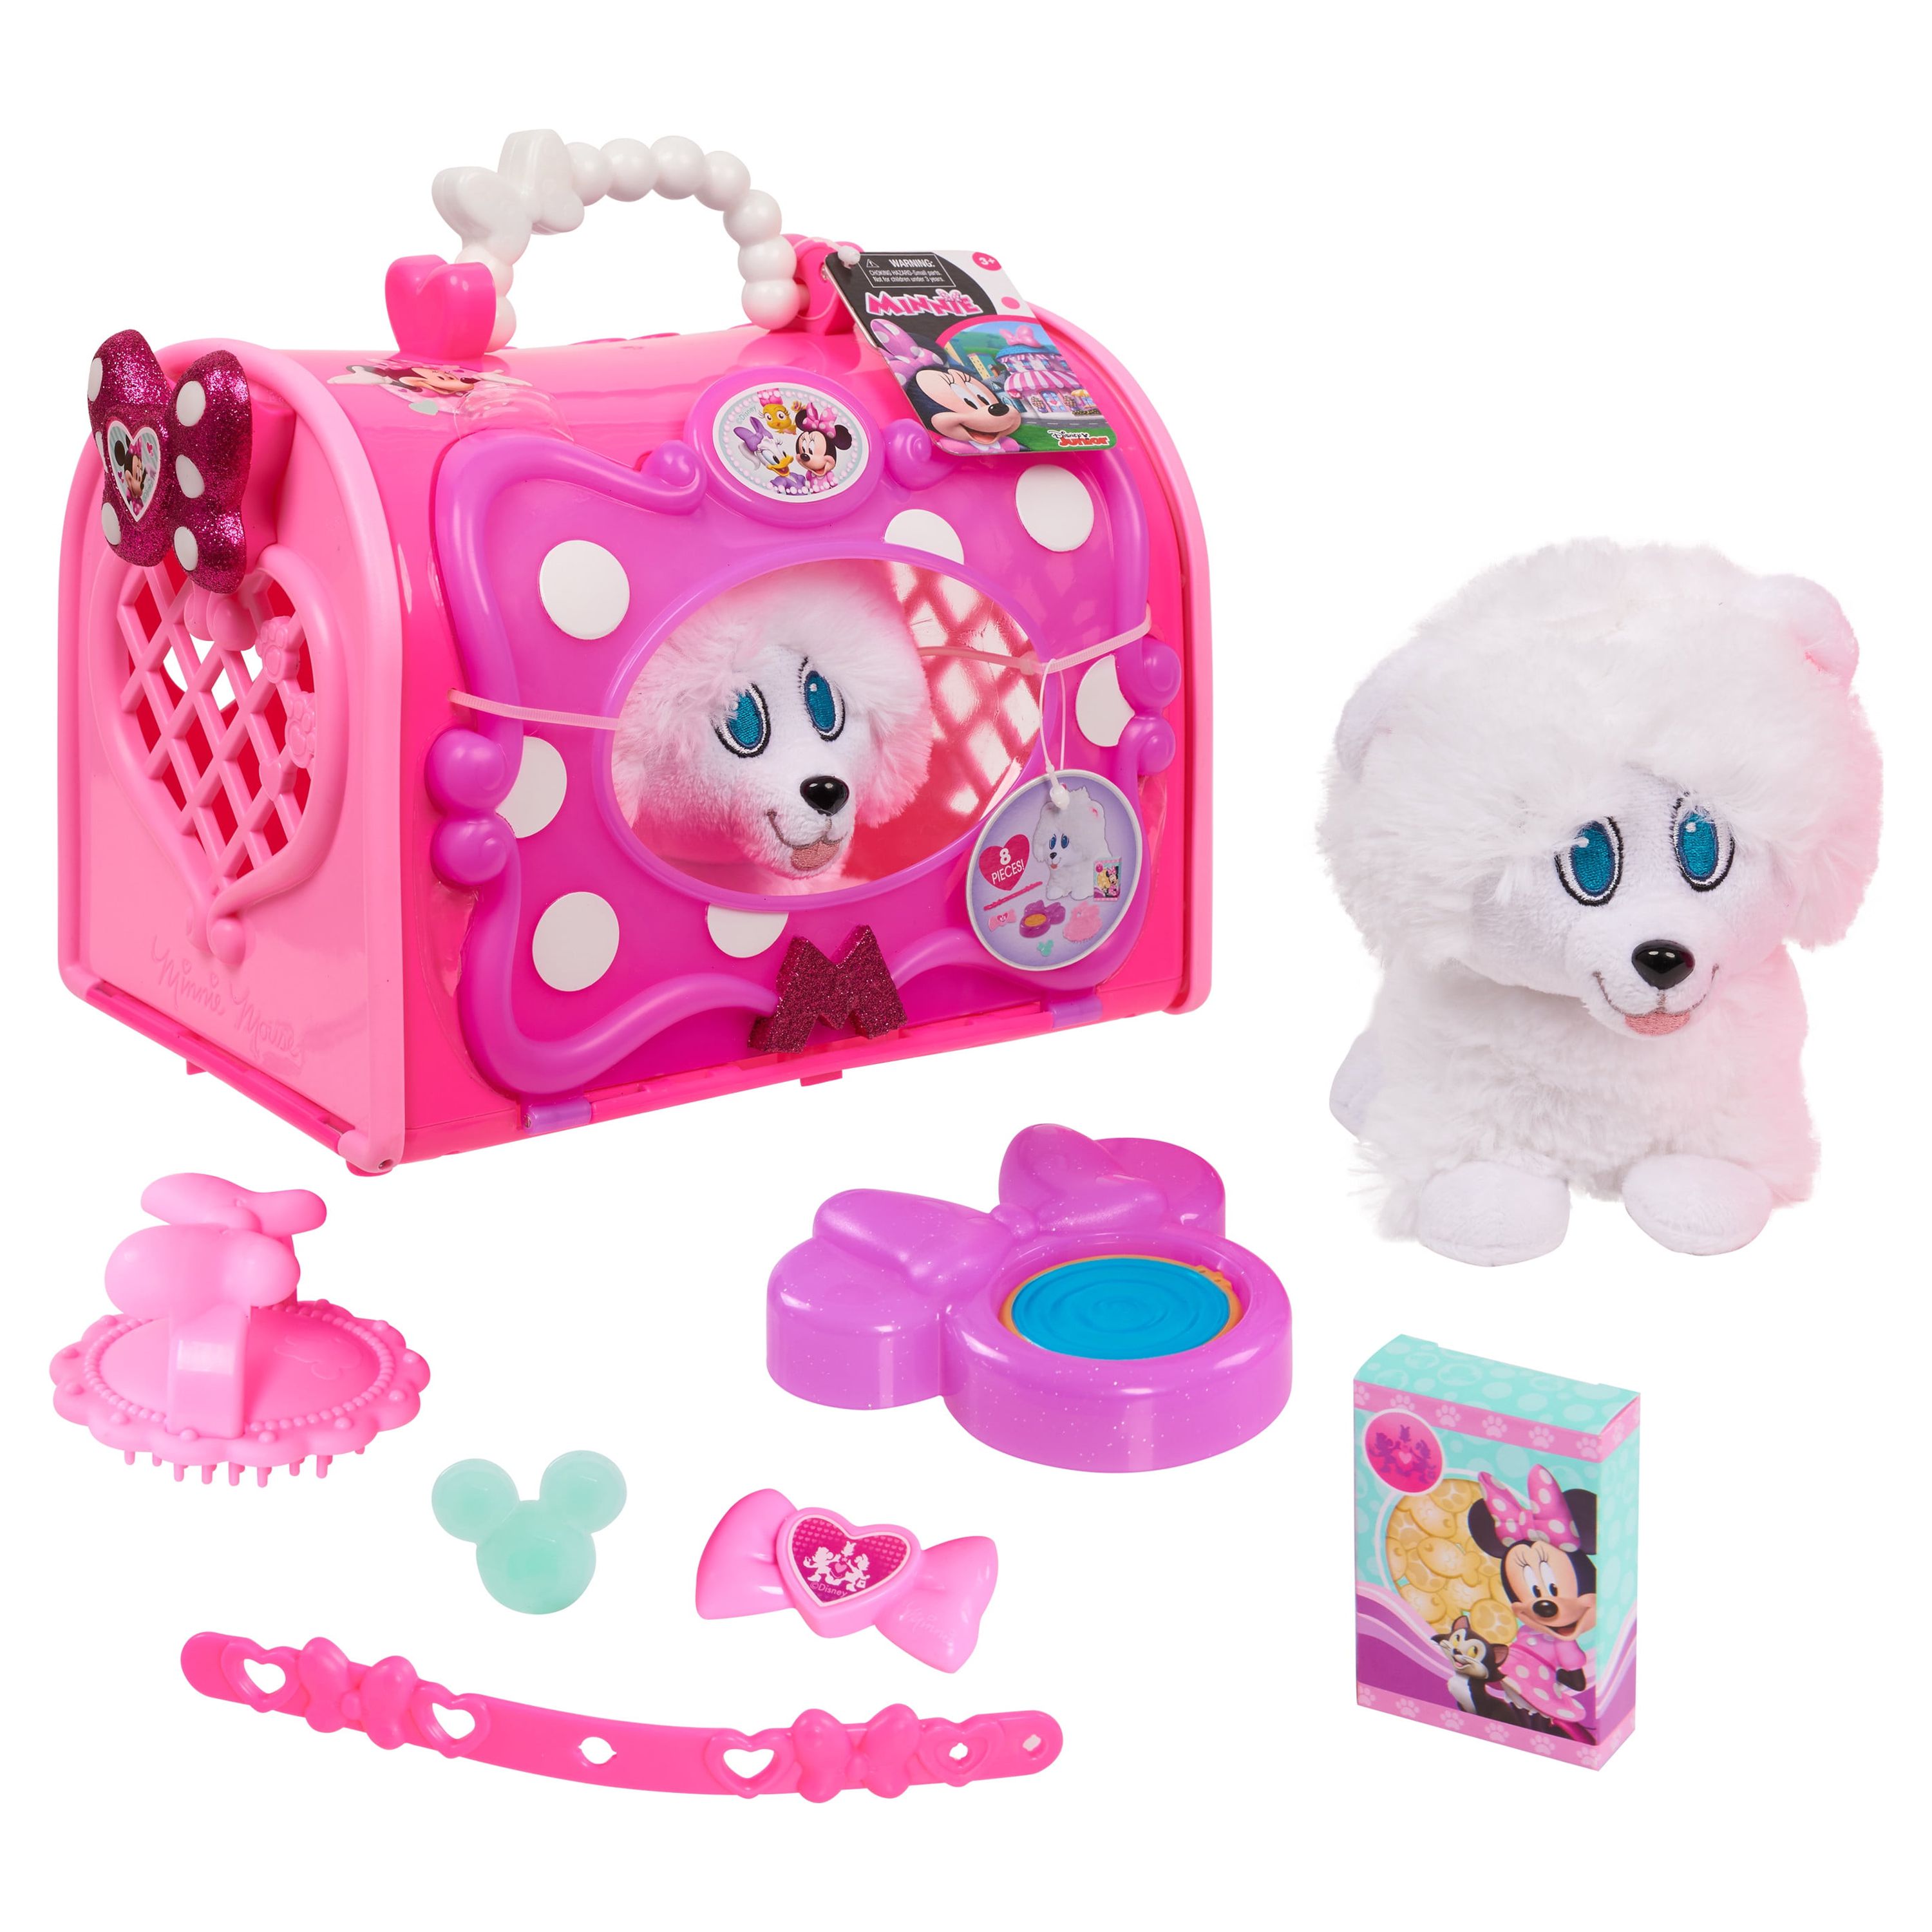 Minnie's Happy Helpers Pet Carrier, Officially Licensed Kids Toys for Ages 3 Up, Gifts and Presents - image 1 of 2